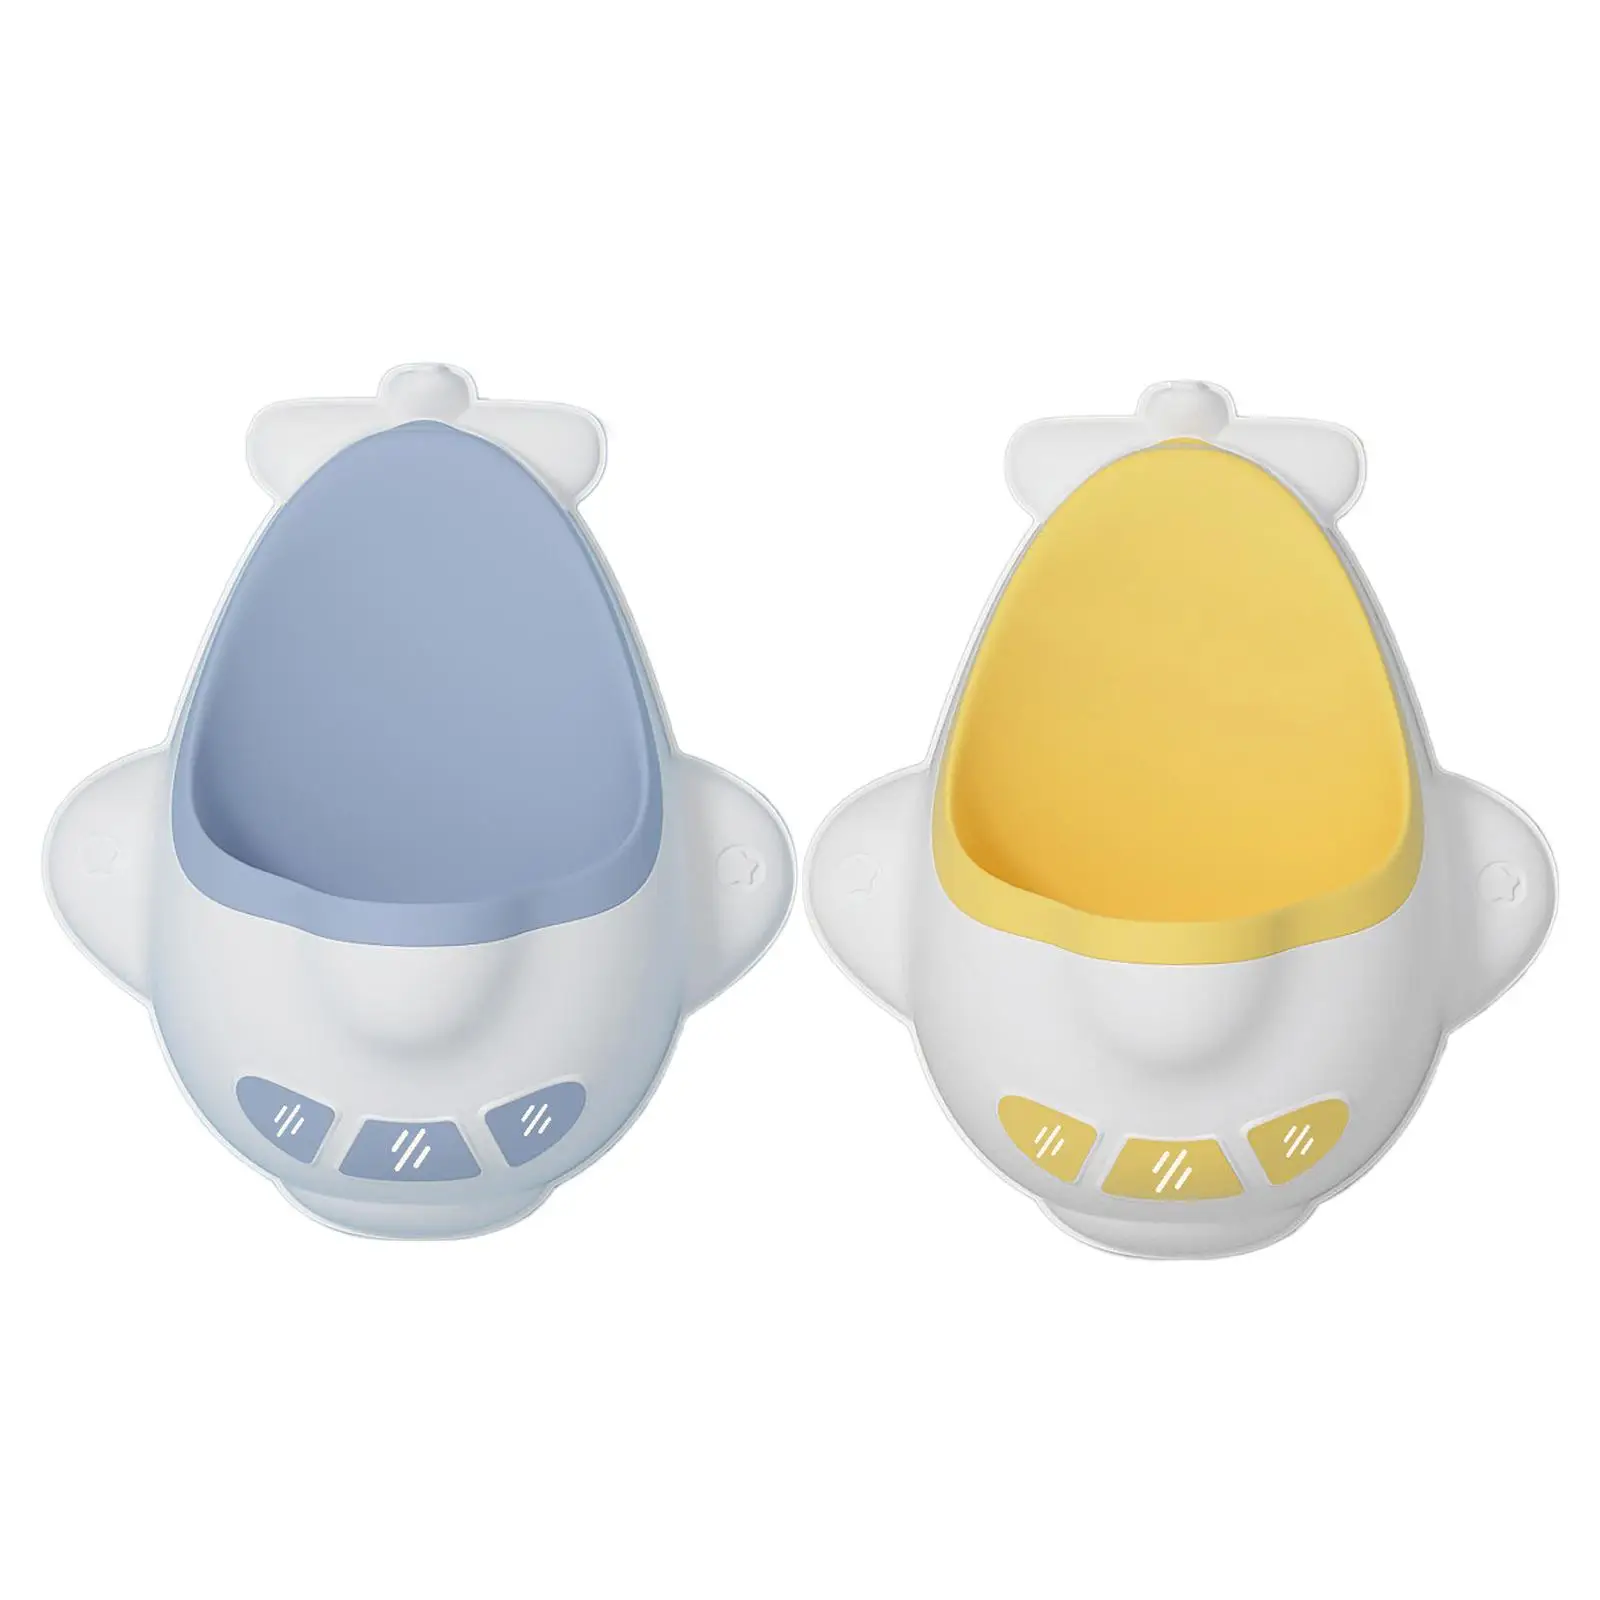 Boys Urinal Cute Plane Wall Mounted Potty for Children Easy to Clean and Hygienic Lightweight